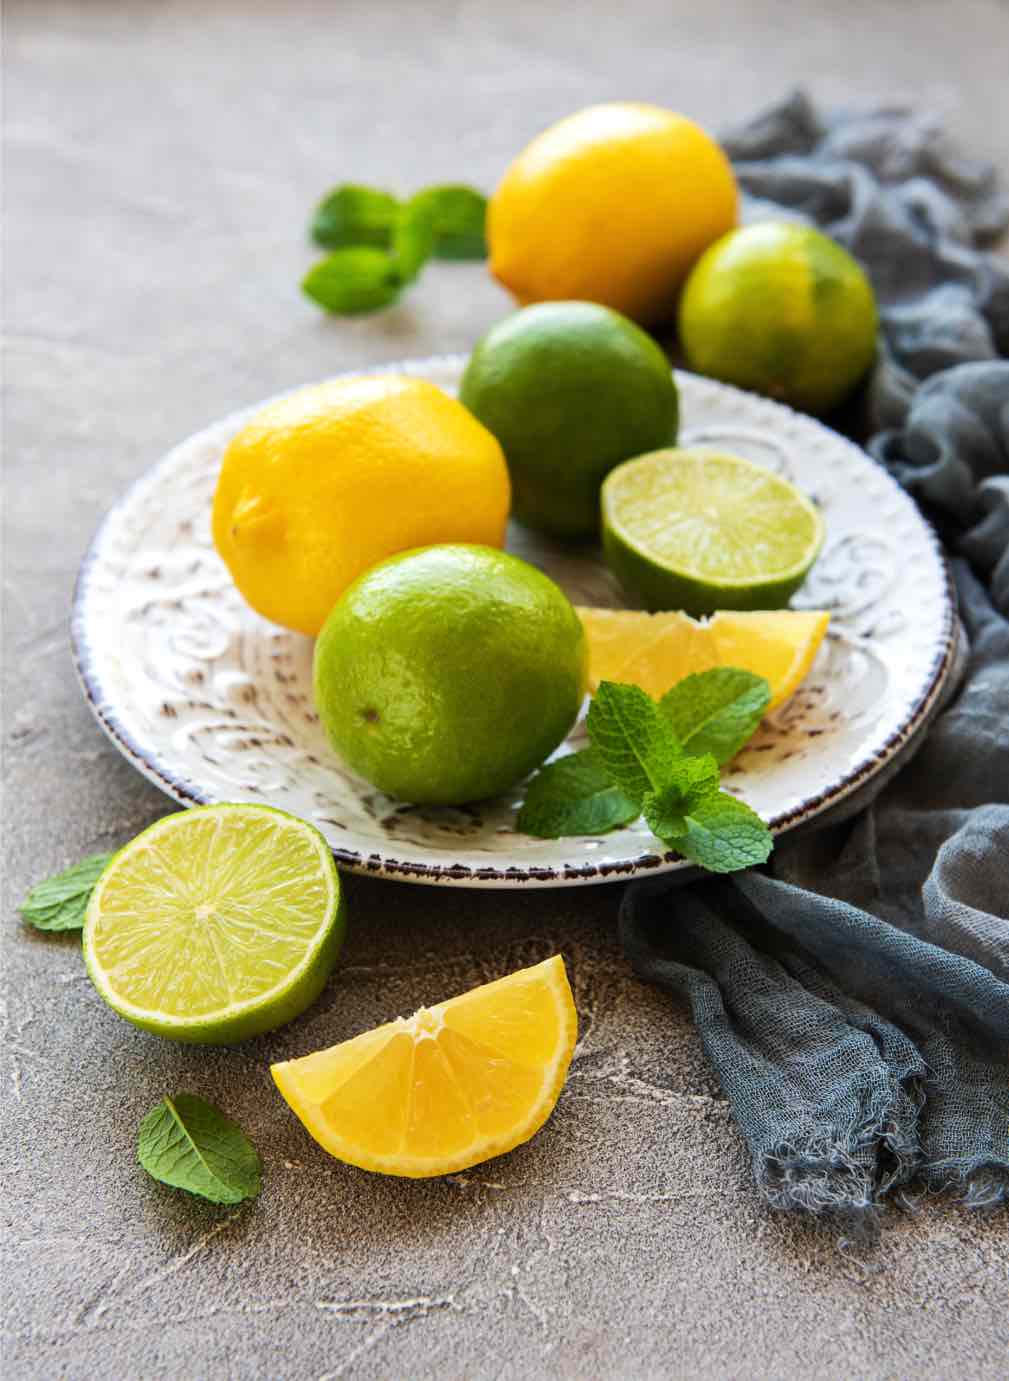 Lemons and limes are great for humans, but not for dogs - learn more with Dog Training Elite Denver in Boulder!